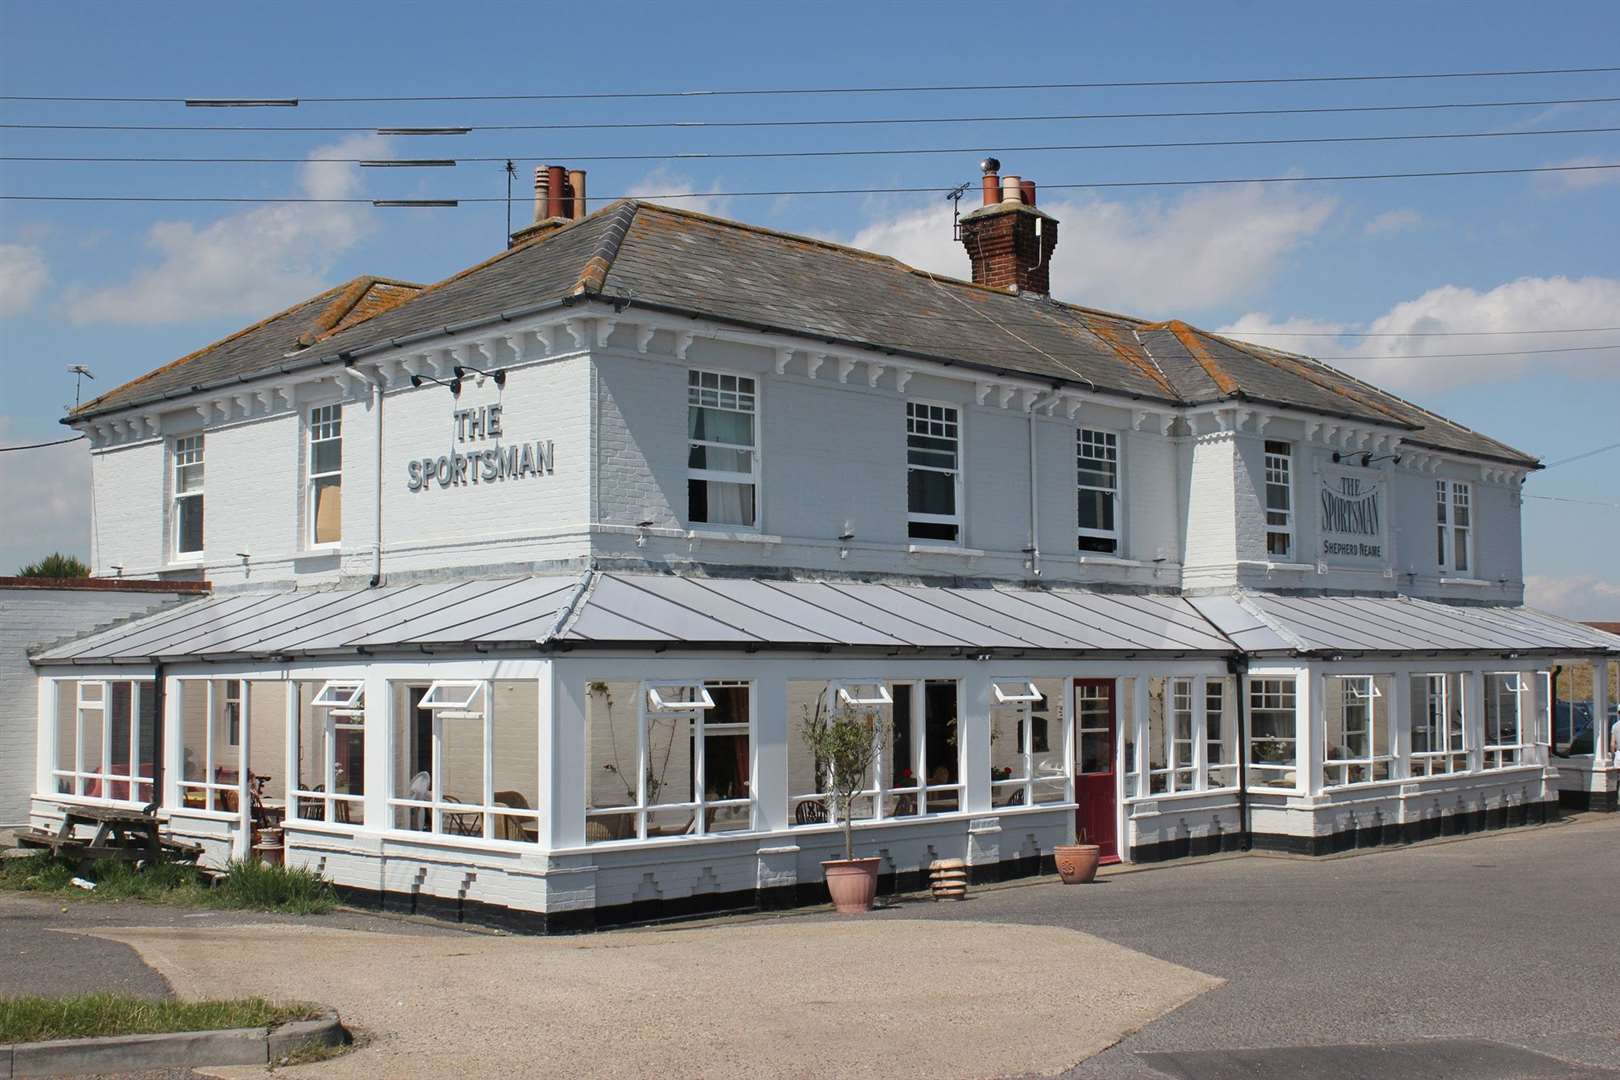 The Sportsman in Seasalter. Picture: Mark Anthony Fox